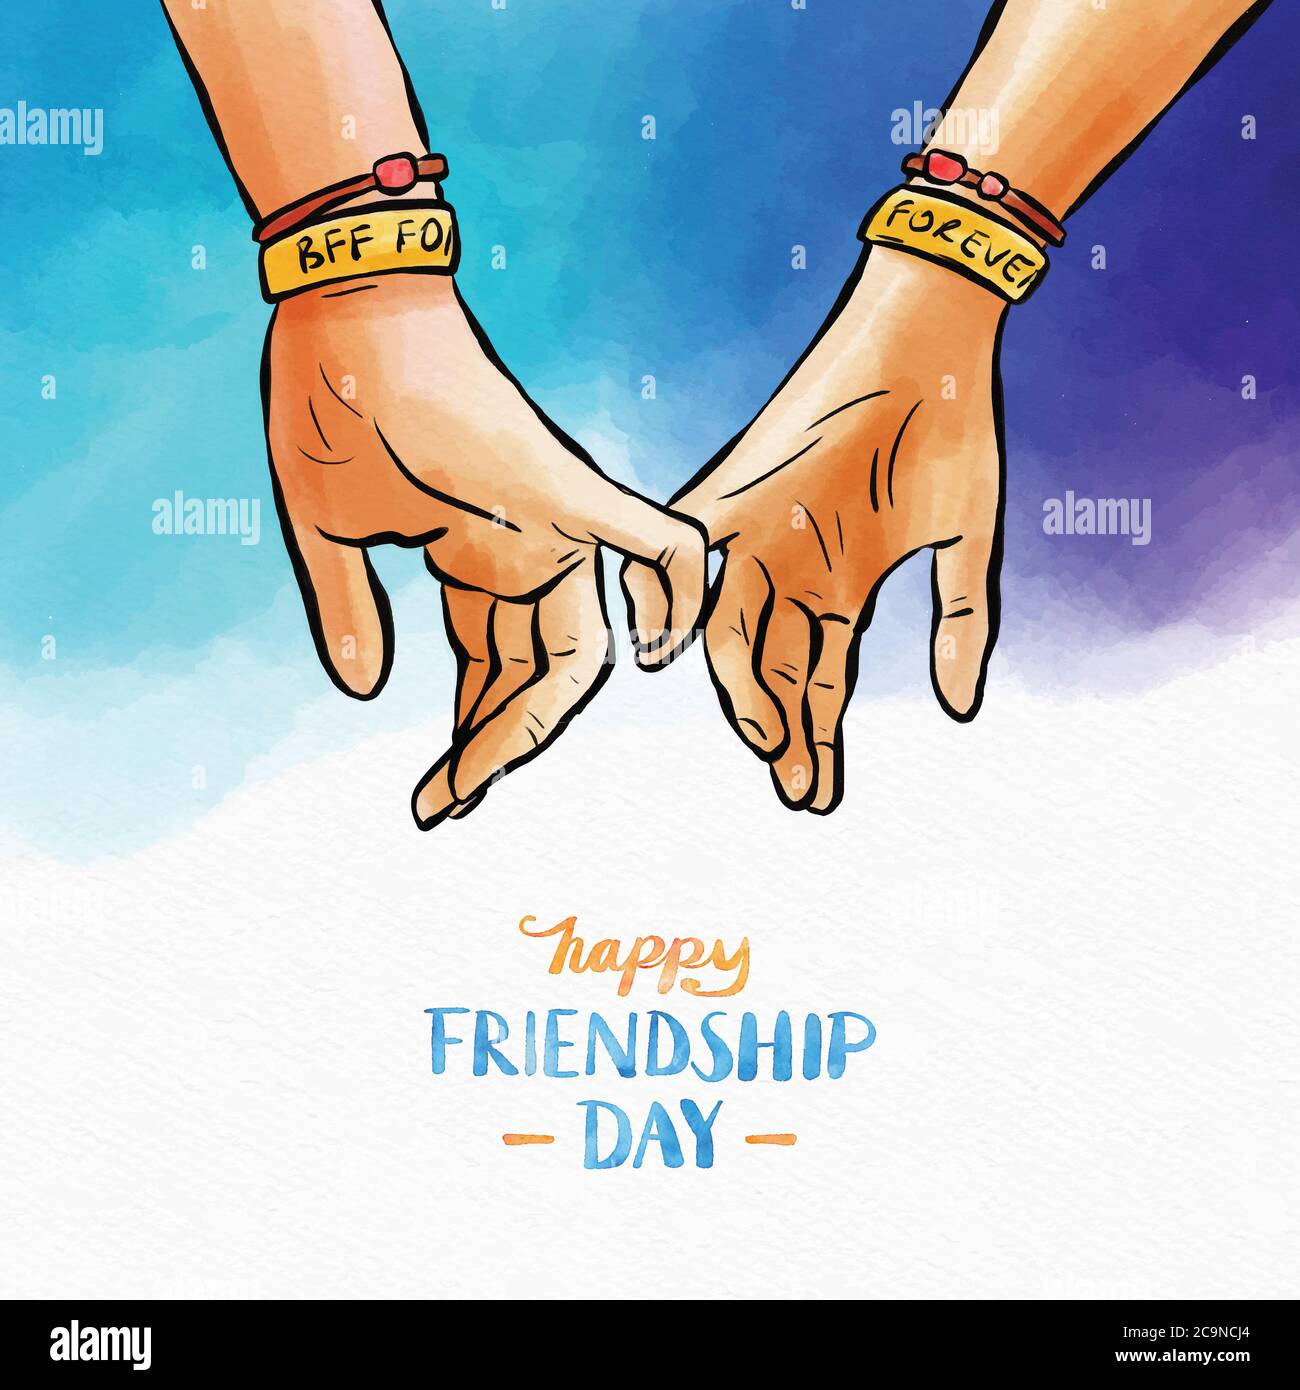 Happy Friendship Day Frames With Photo  Happy best friend day, Friends  forever pictures, Friends forever pic